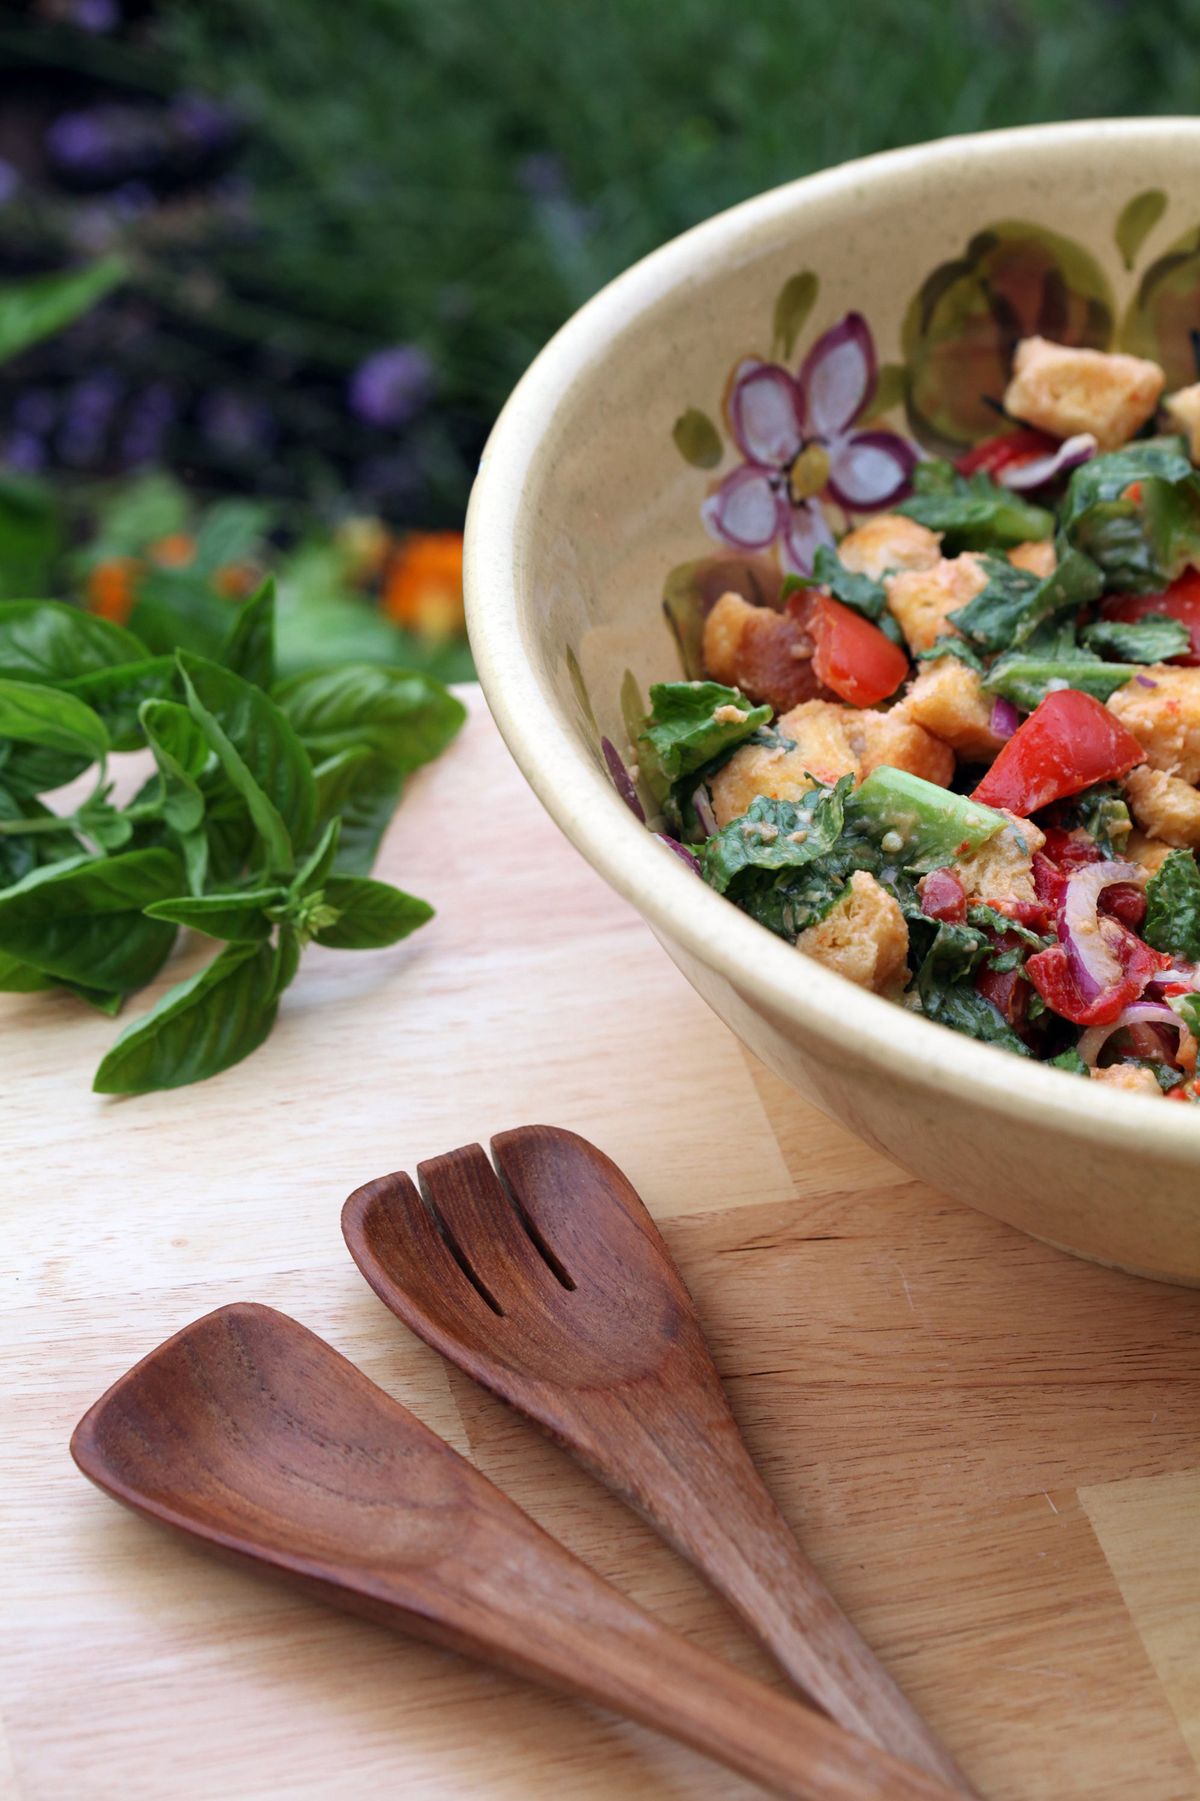 Basil and tarragon are options for Garden Panzanella, which also makes use of day-old bread.